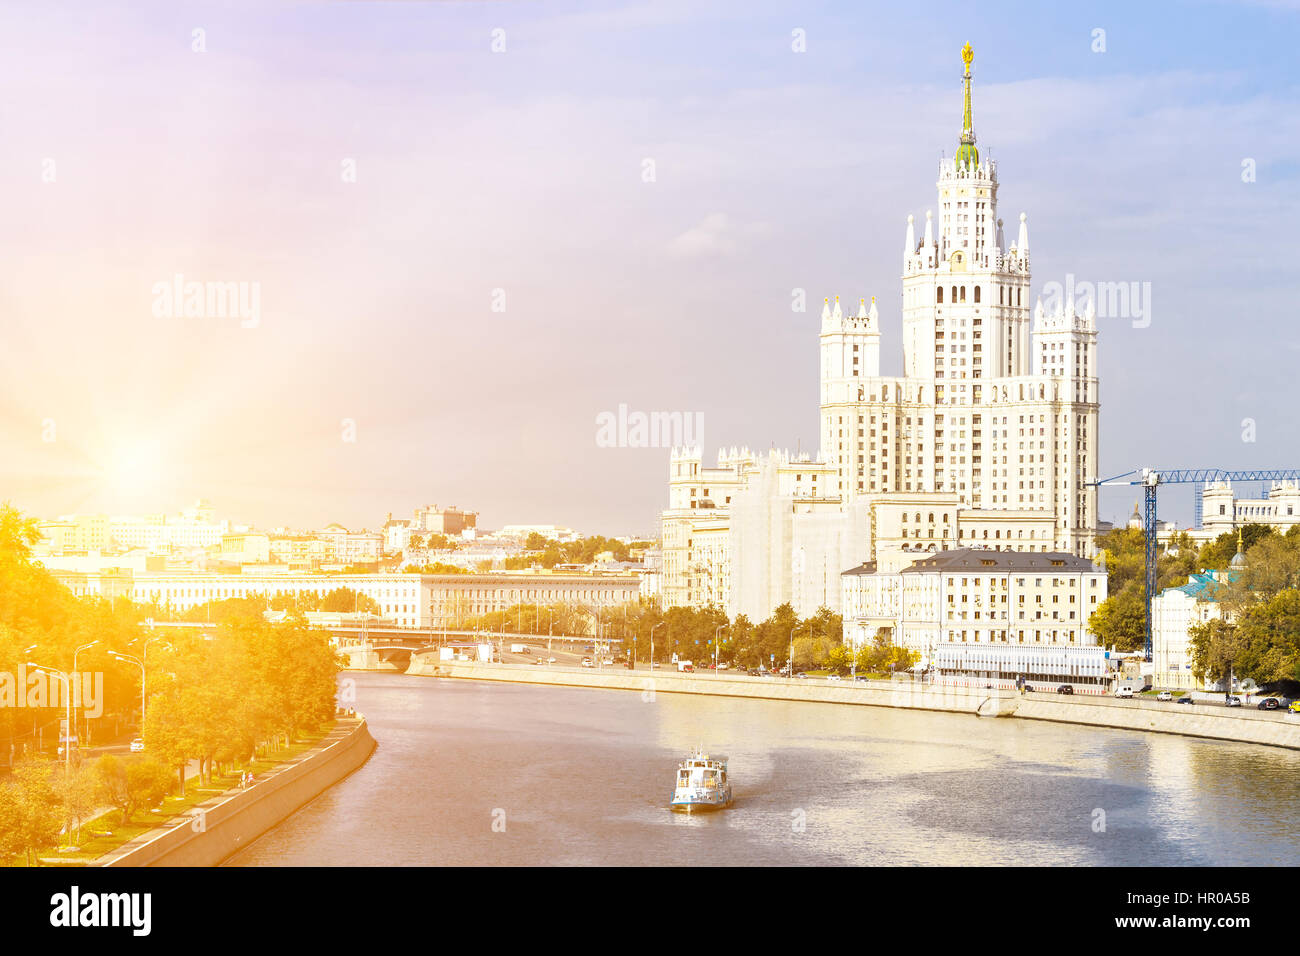 Kotelnicheskaya embankment building with leisure boat on the river Stock Photo